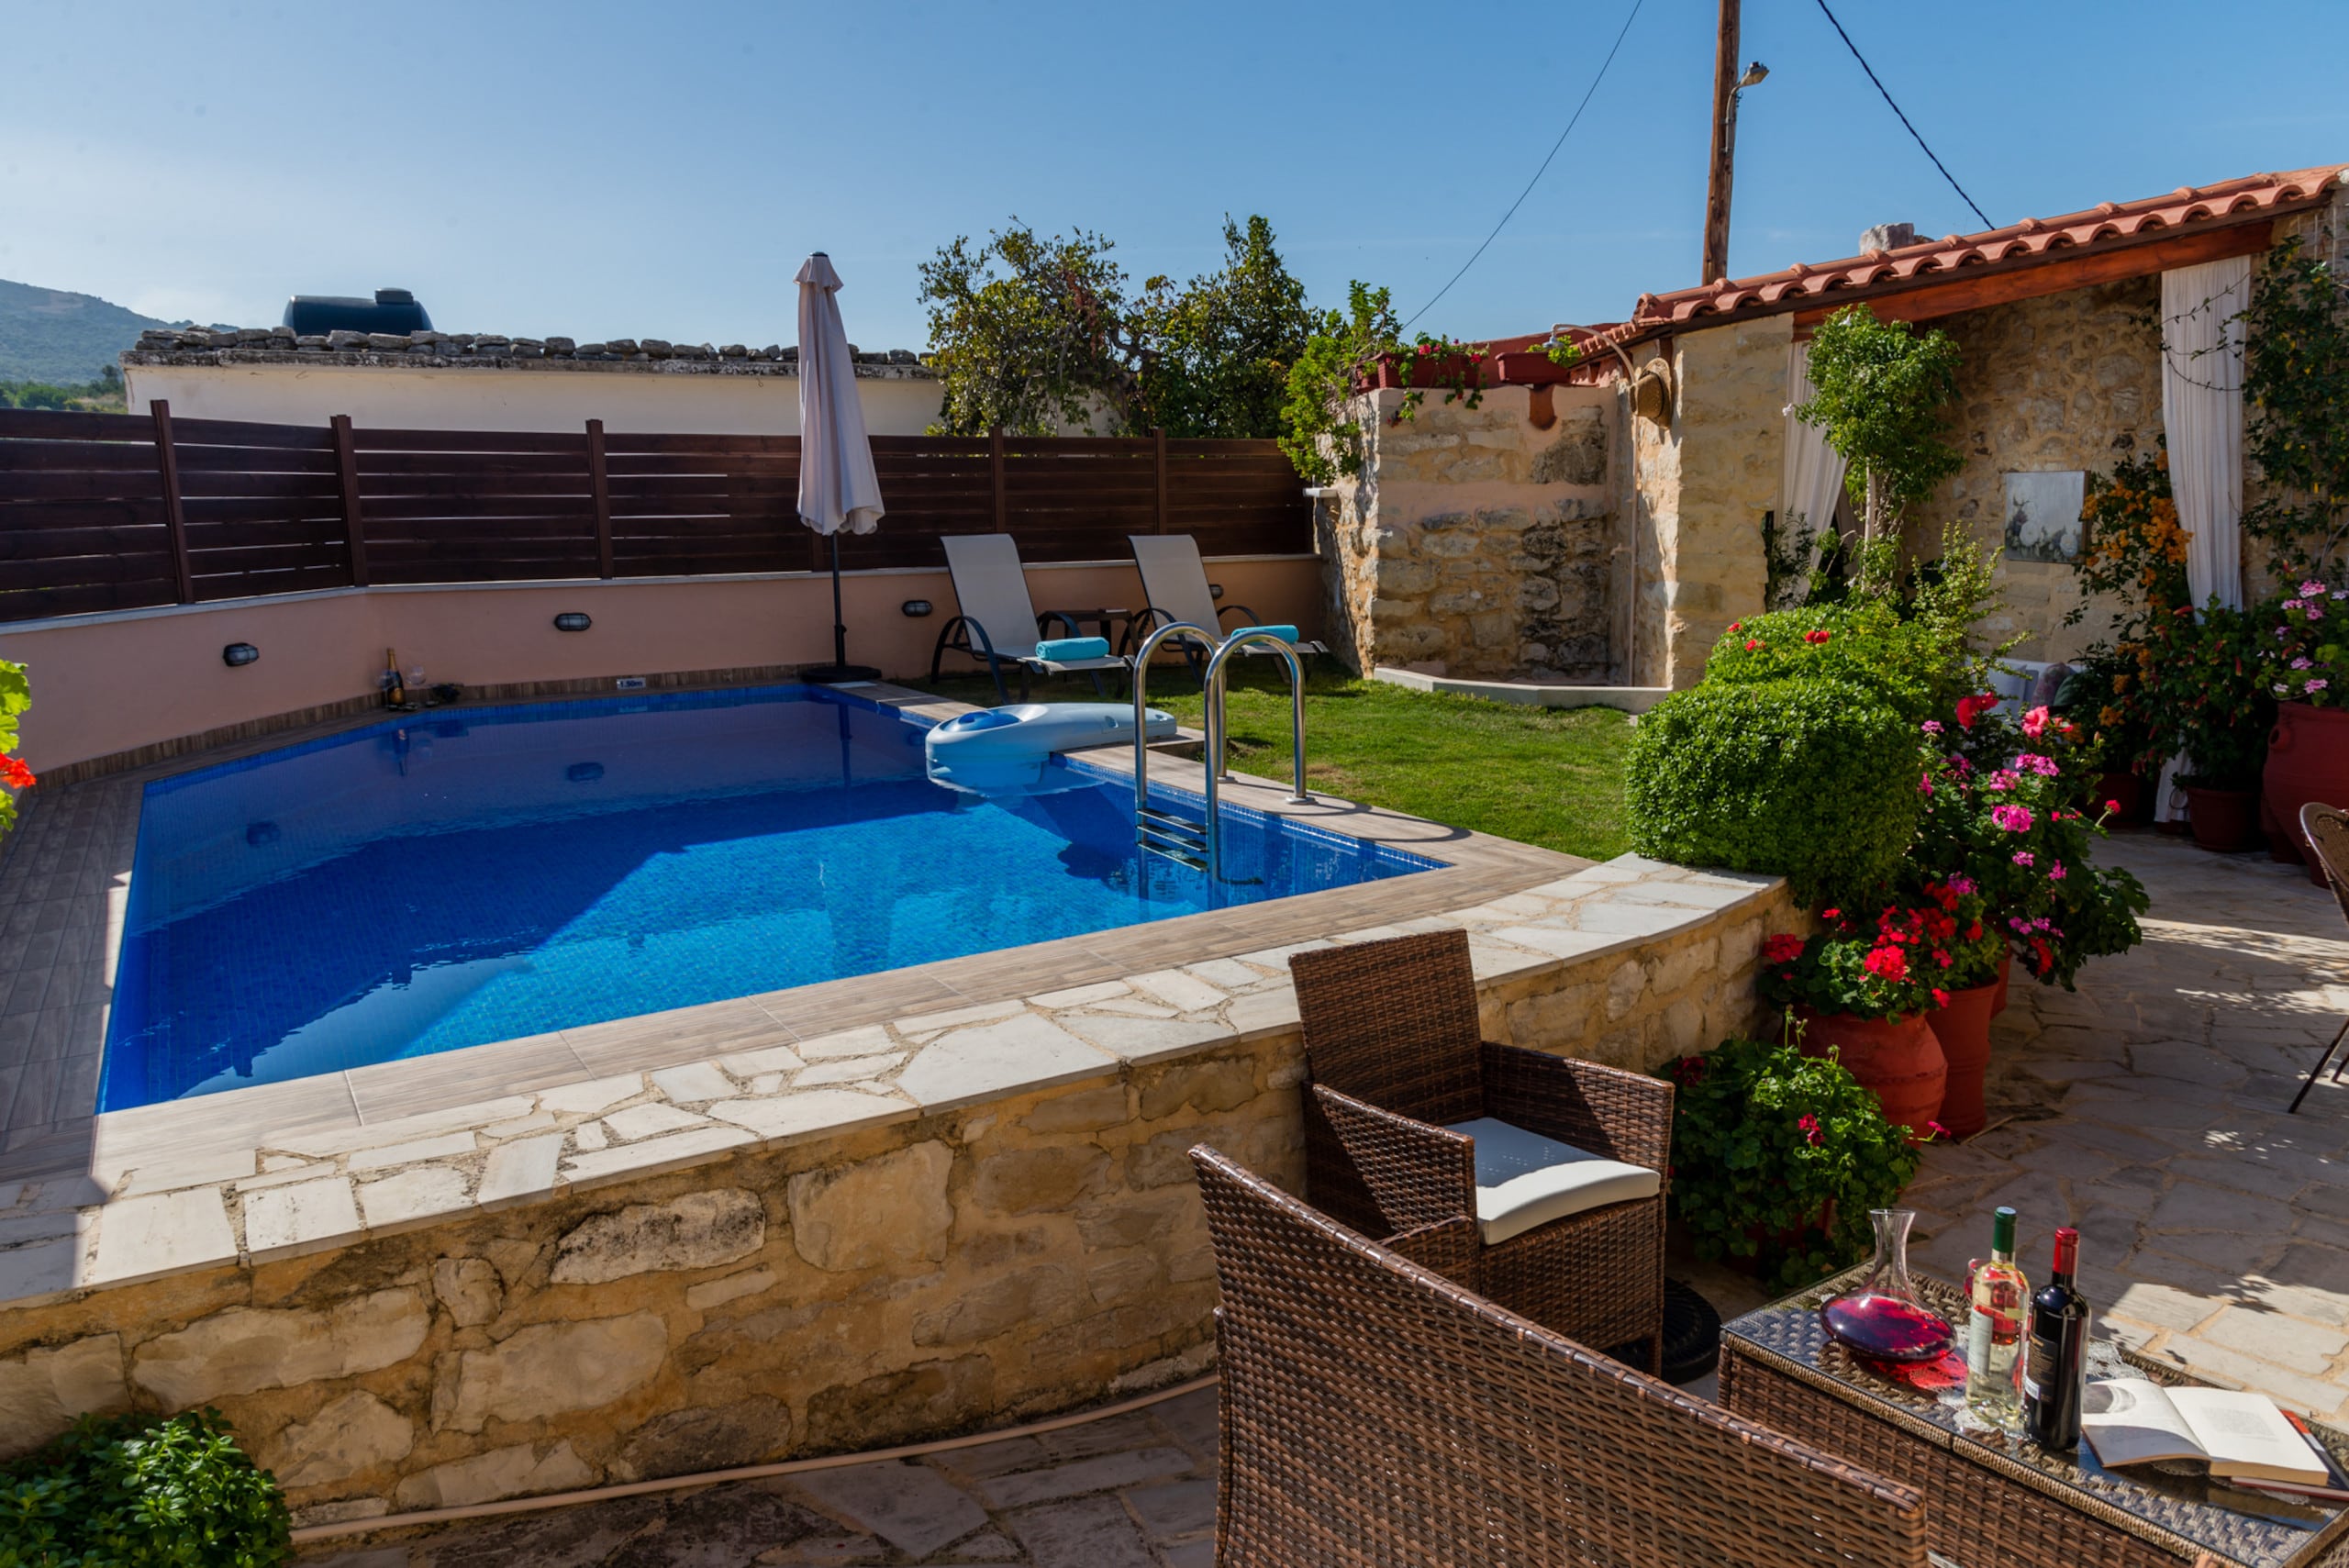 The pool and lawn covered terrace of Villa Armonia is totally private!